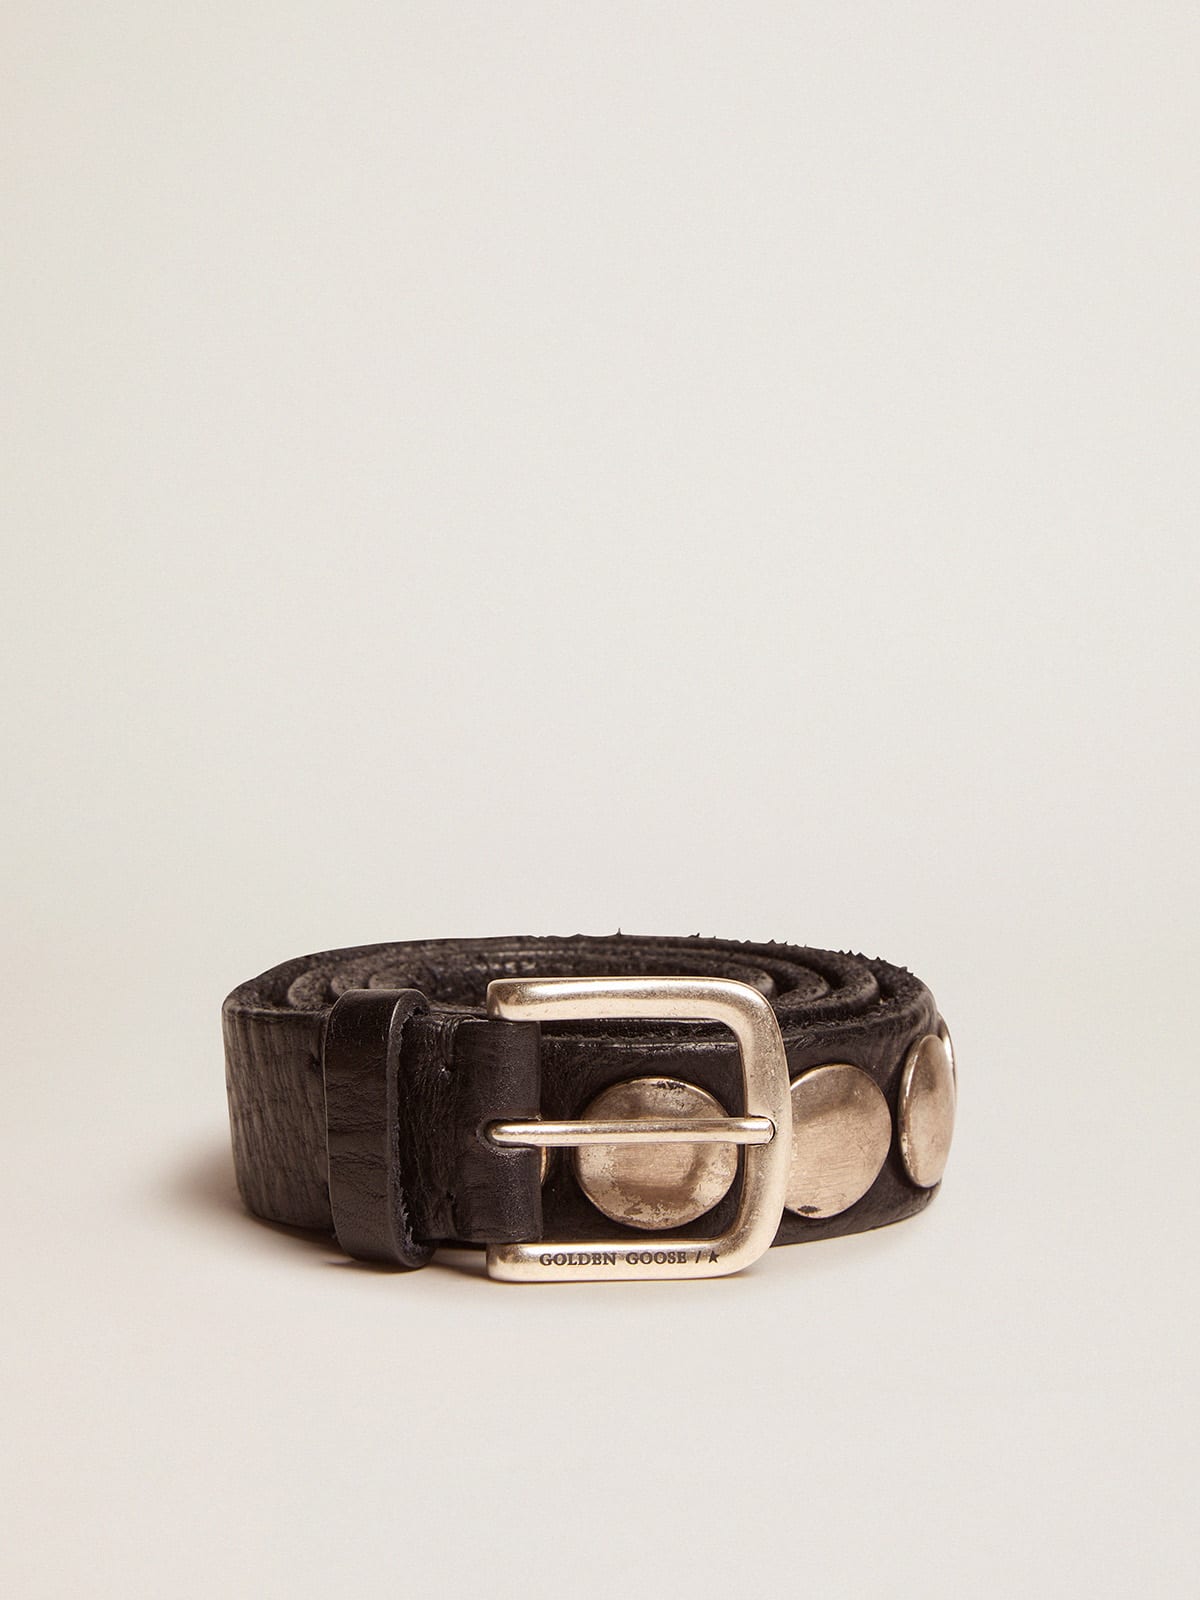 Golden Goose - Women's black Trinidad belt in washed leather with silver studs in 